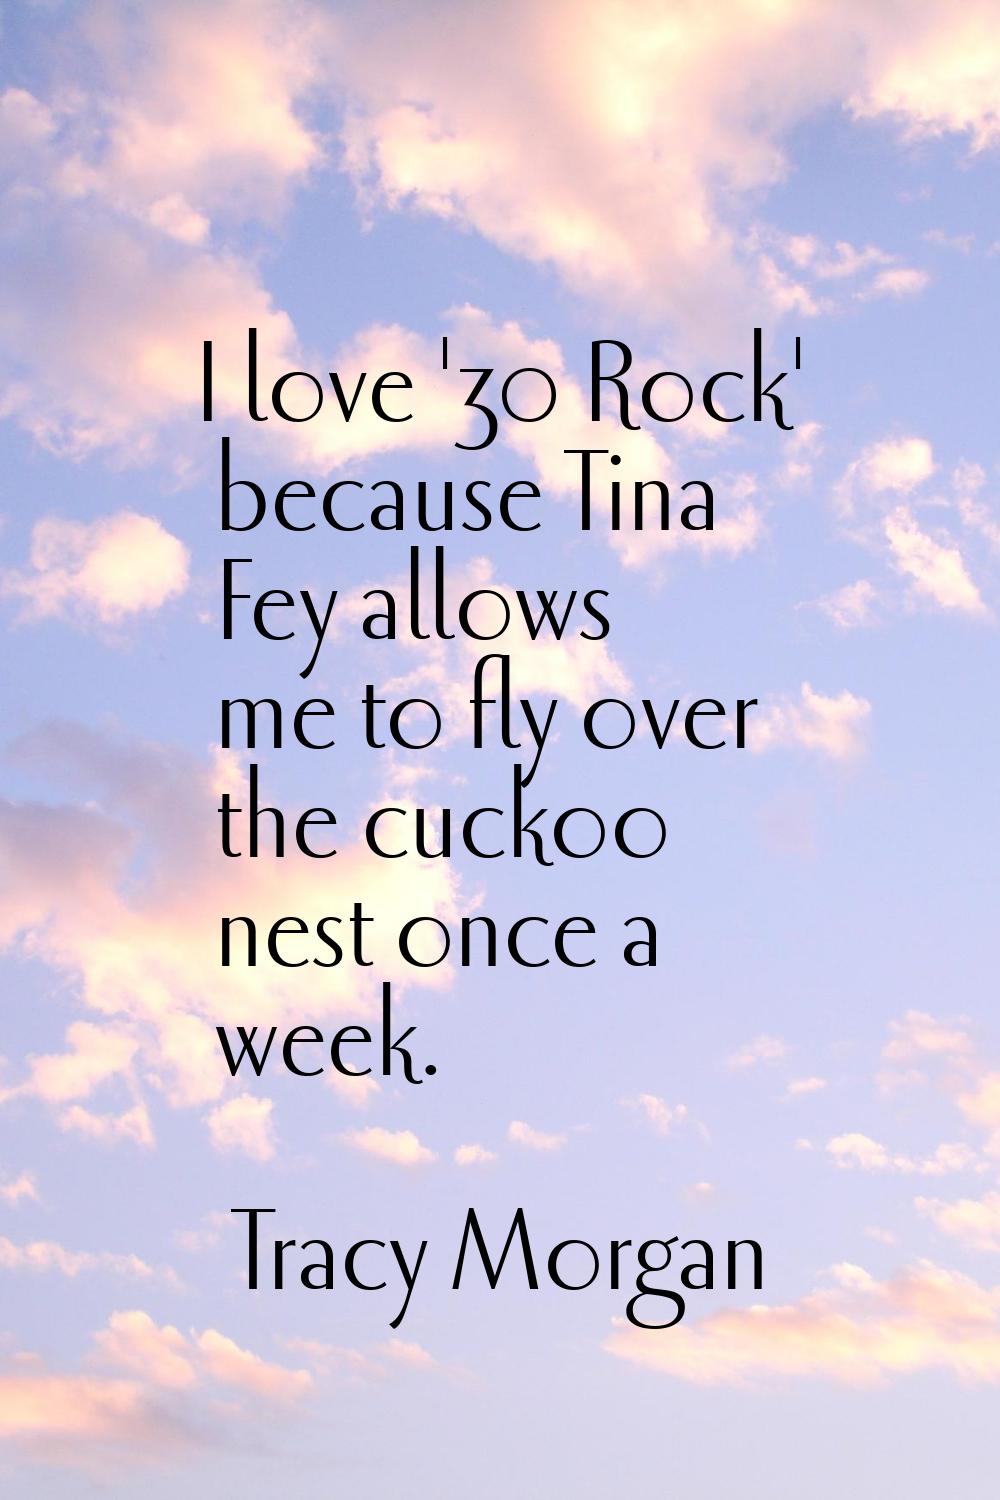 I love '30 Rock' because Tina Fey allows me to fly over the cuckoo nest once a week.